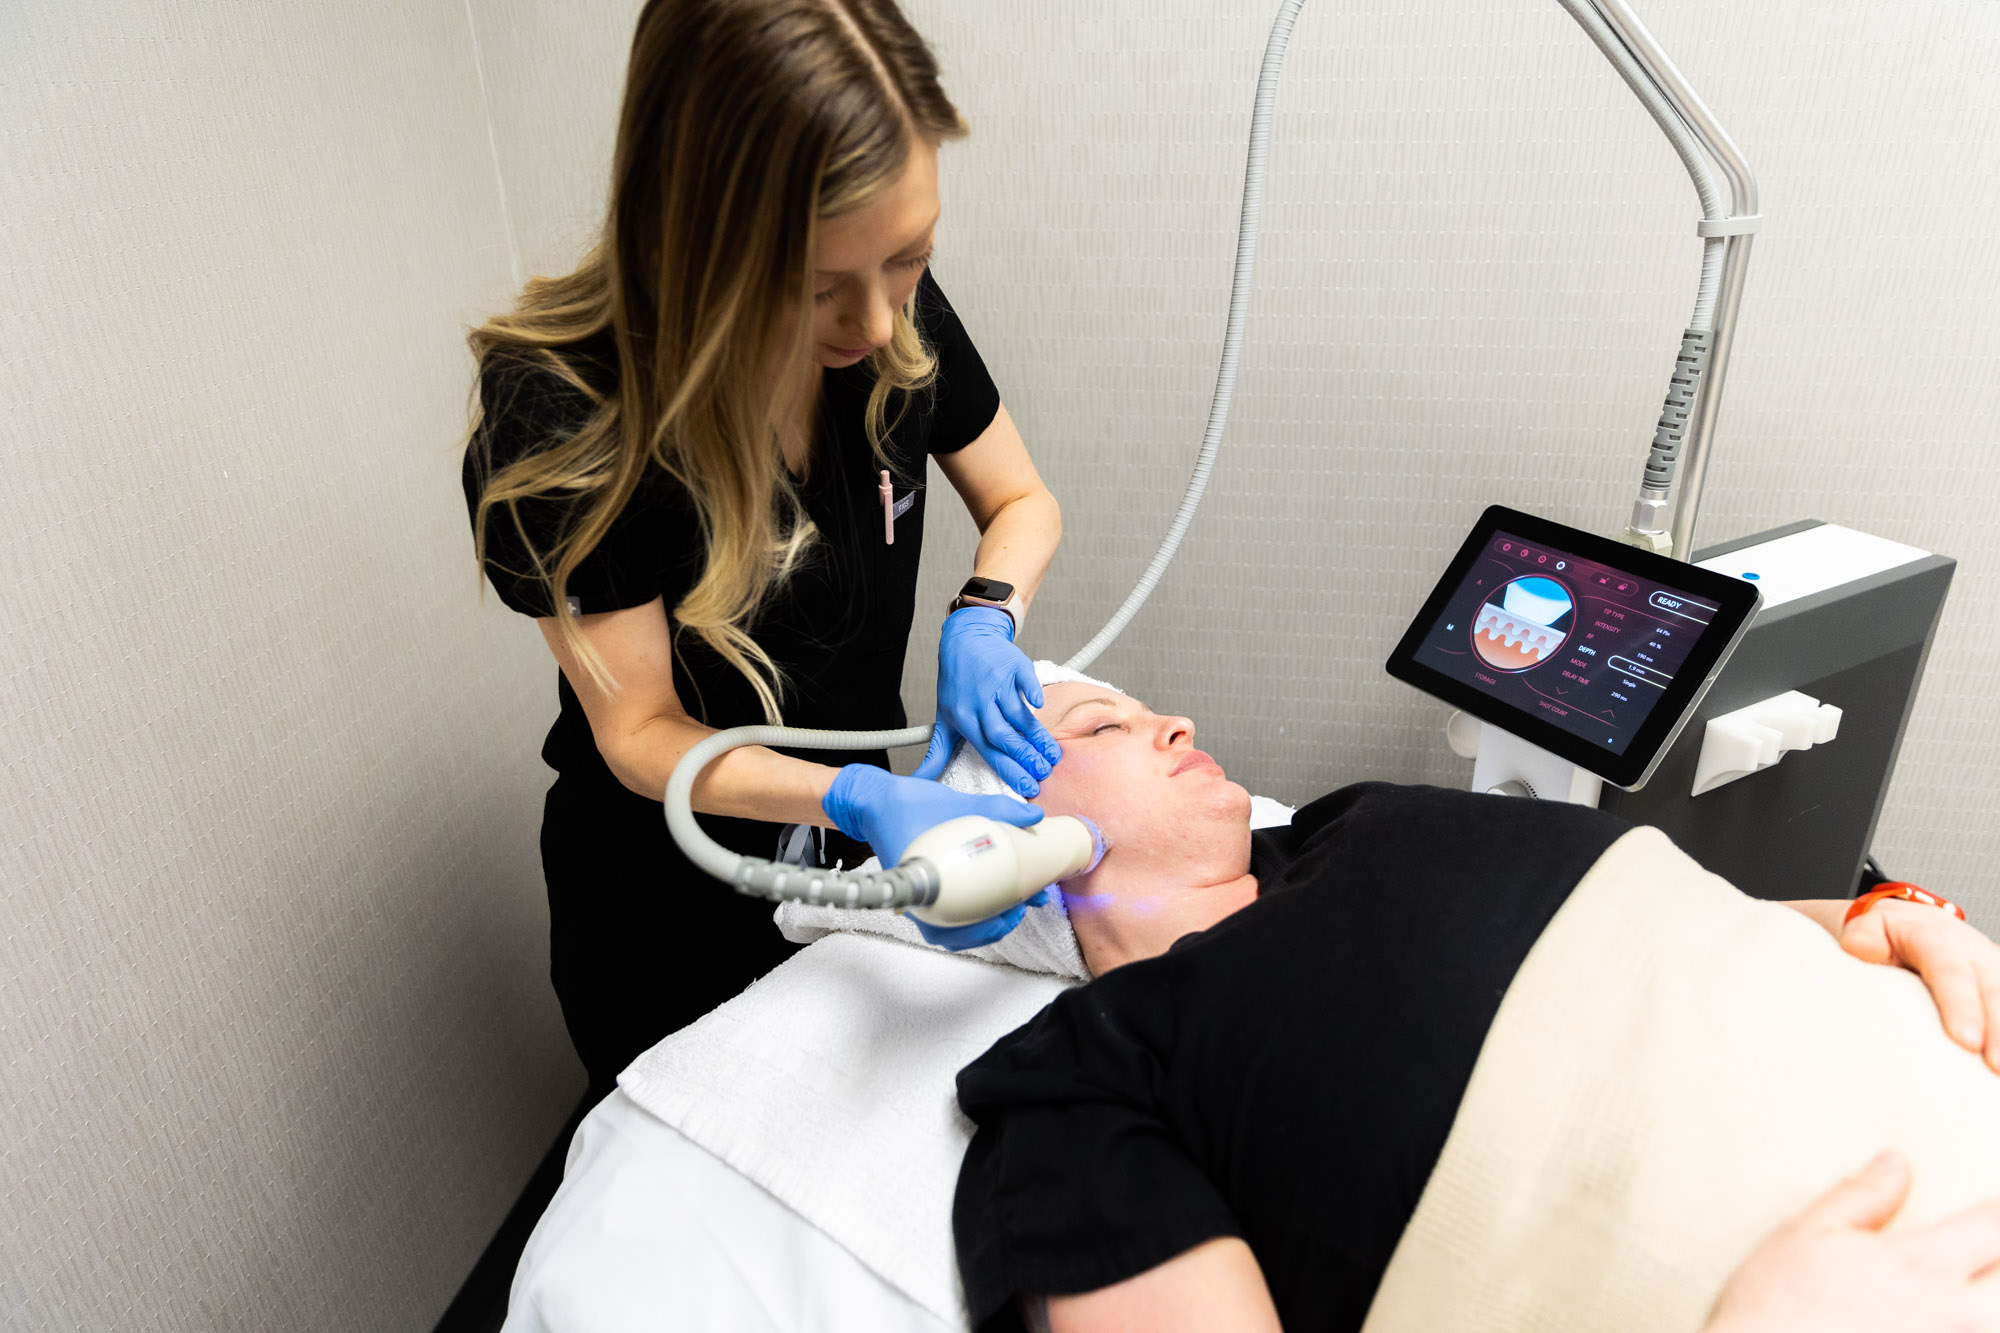 A female client is receiving a microneedling treatment. She is lying on a medical bed with hair covered by towel. Eyes are closed. A female Kansas City Skin and Cancer Center employee is holding the microneedling tool in gloved hands. The machine shows the skin layers.